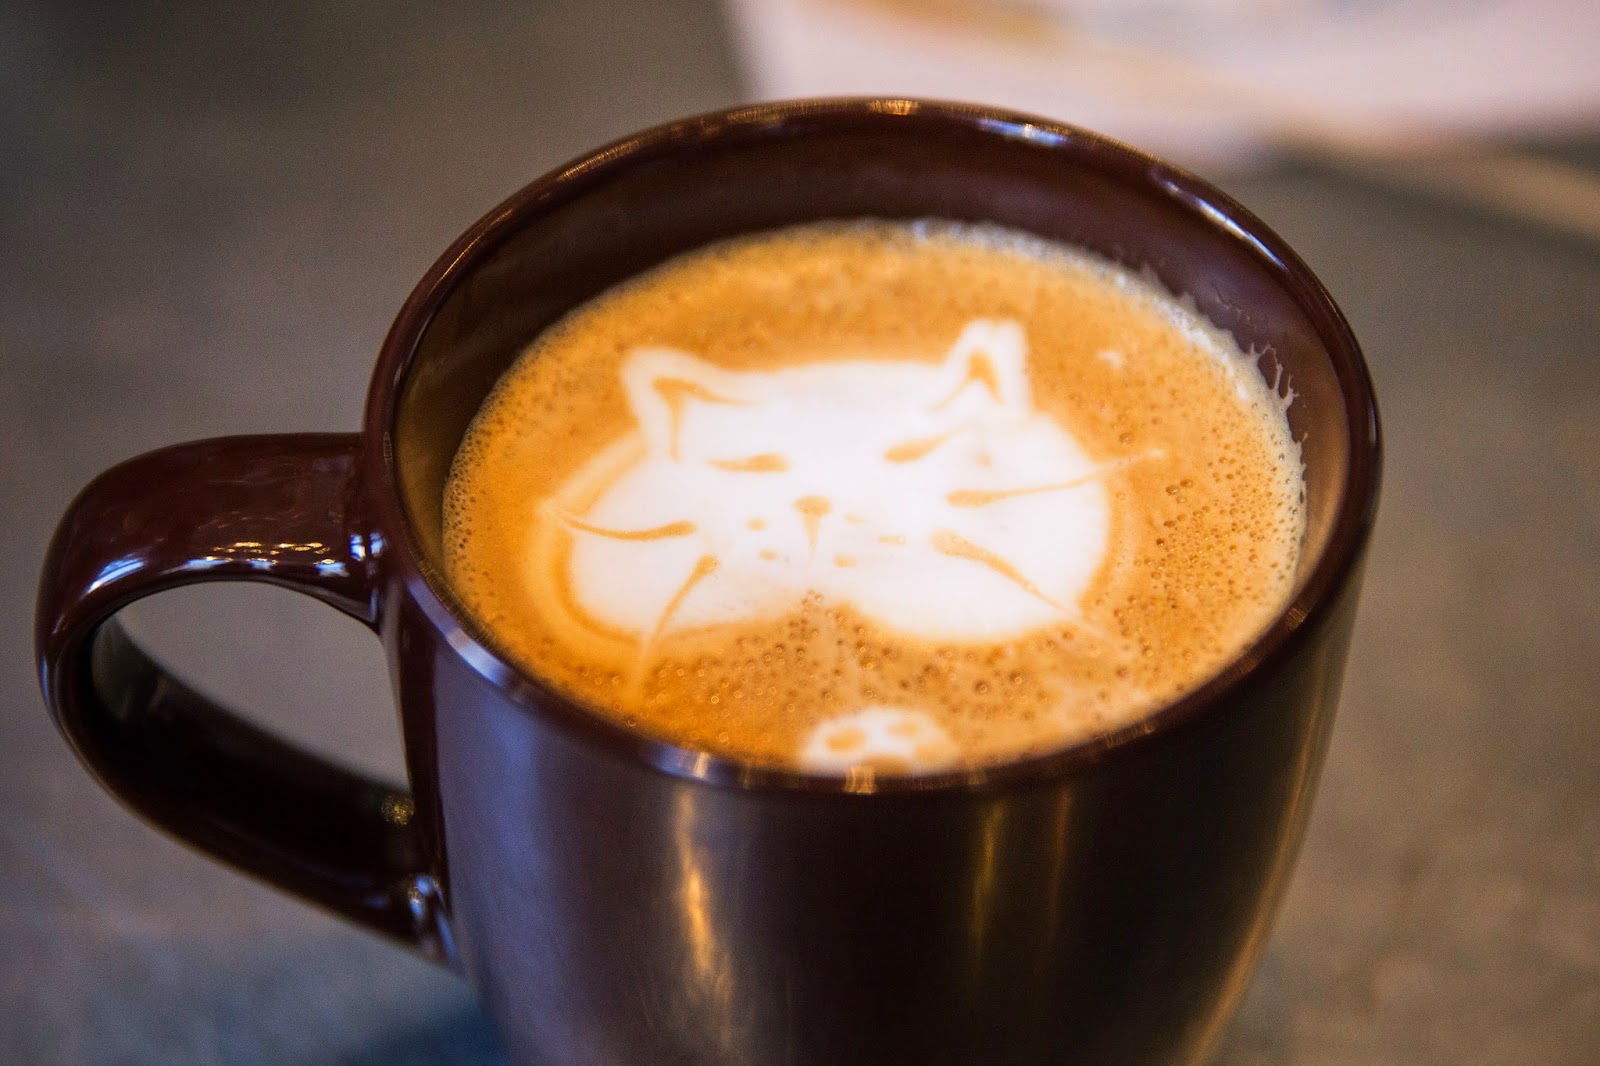 Pop up Cat  Cafe  opens in America Images Archival Store